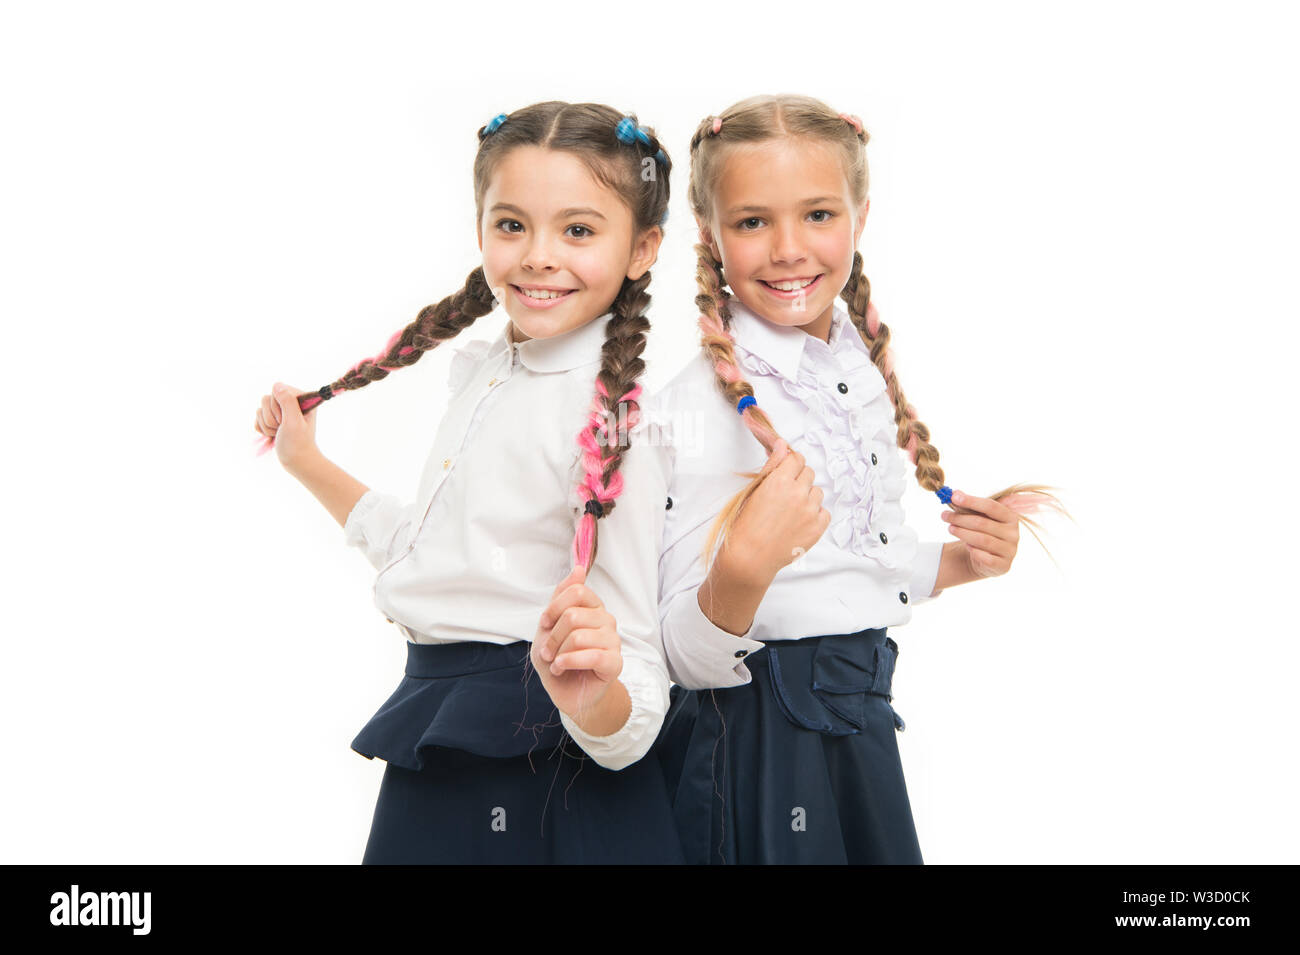 Braiding Hair Adorable Little Girls With Plaited Hair Isolated On White Cute Small Children Holding Long Hair Braids Wearing School Uniform Luxurious Hair Extensions Stock Photo Alamy